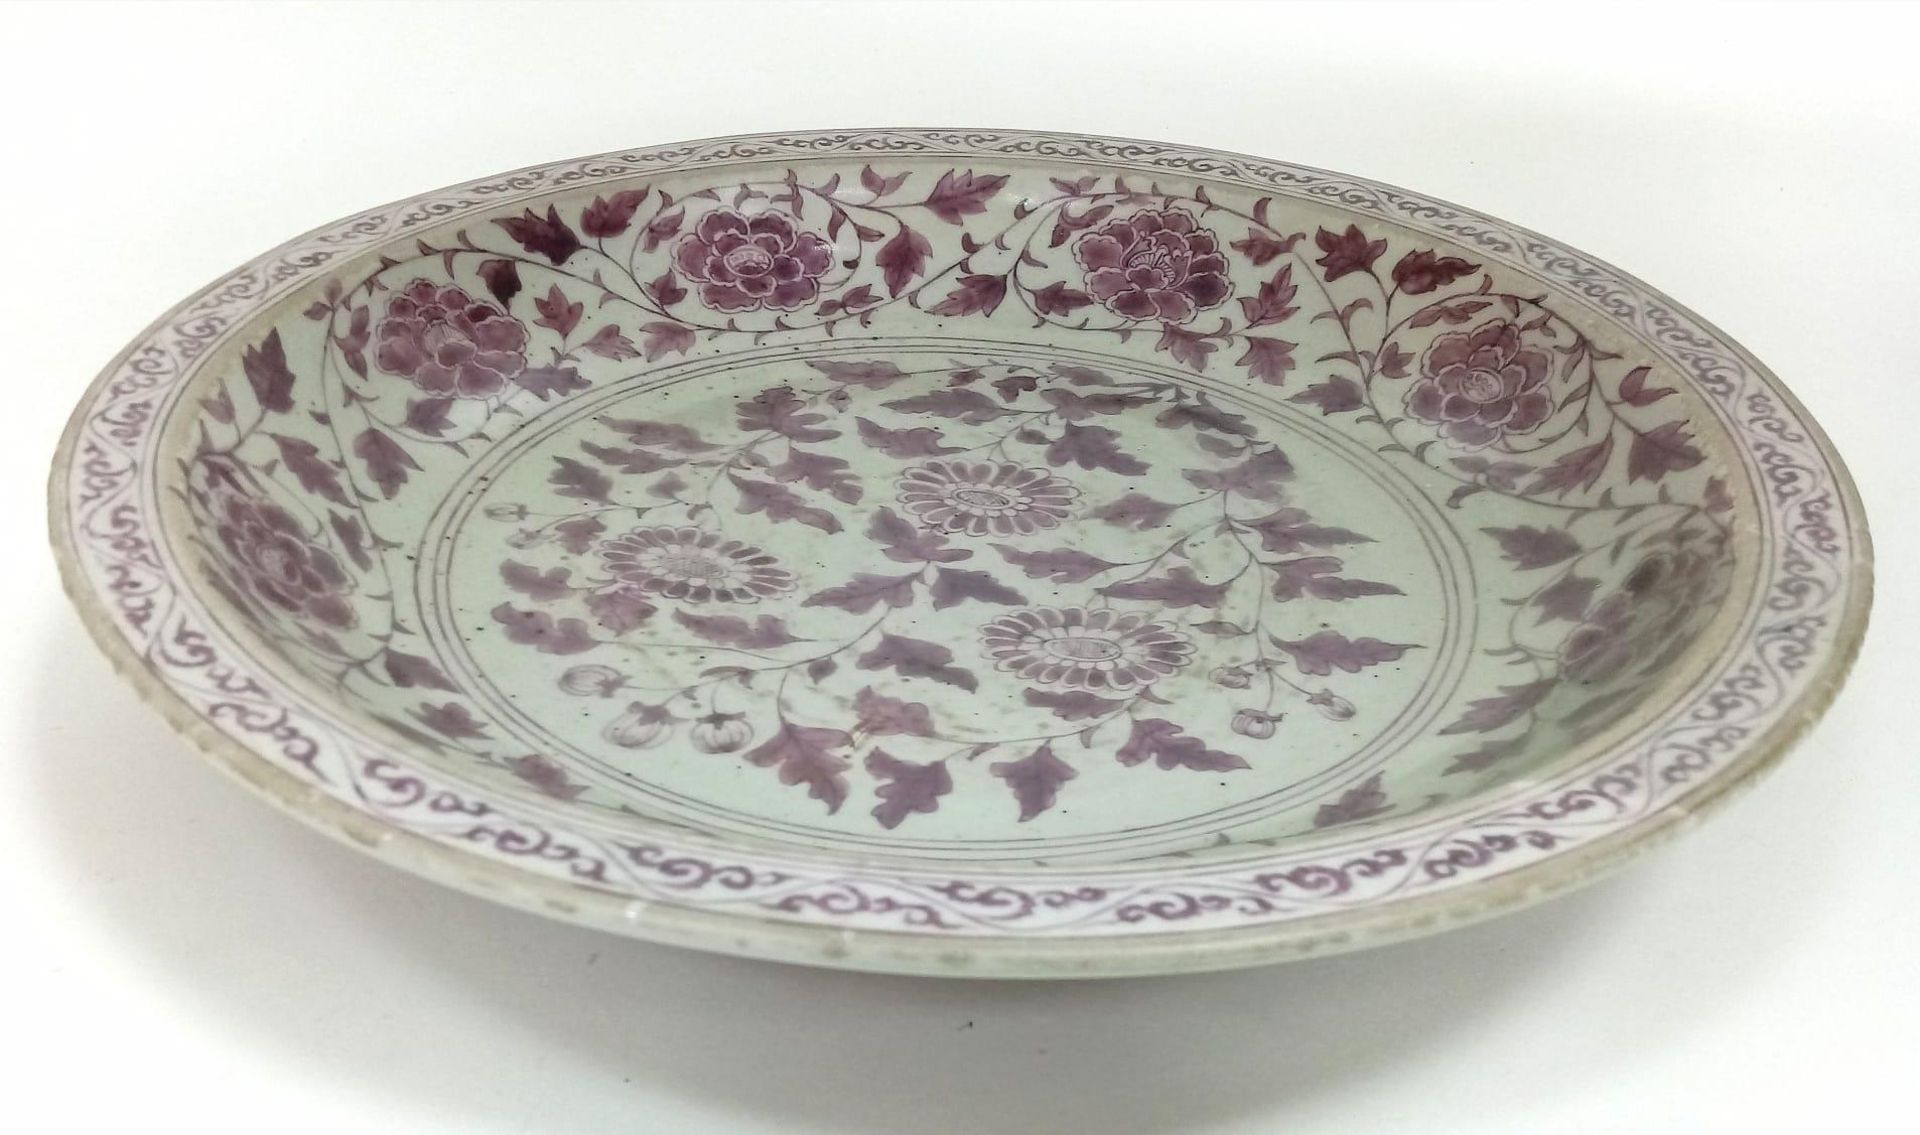 Large Antique Burgundy Floral Serving Dish. Whilst no markings exist on this large bowl, the hand-